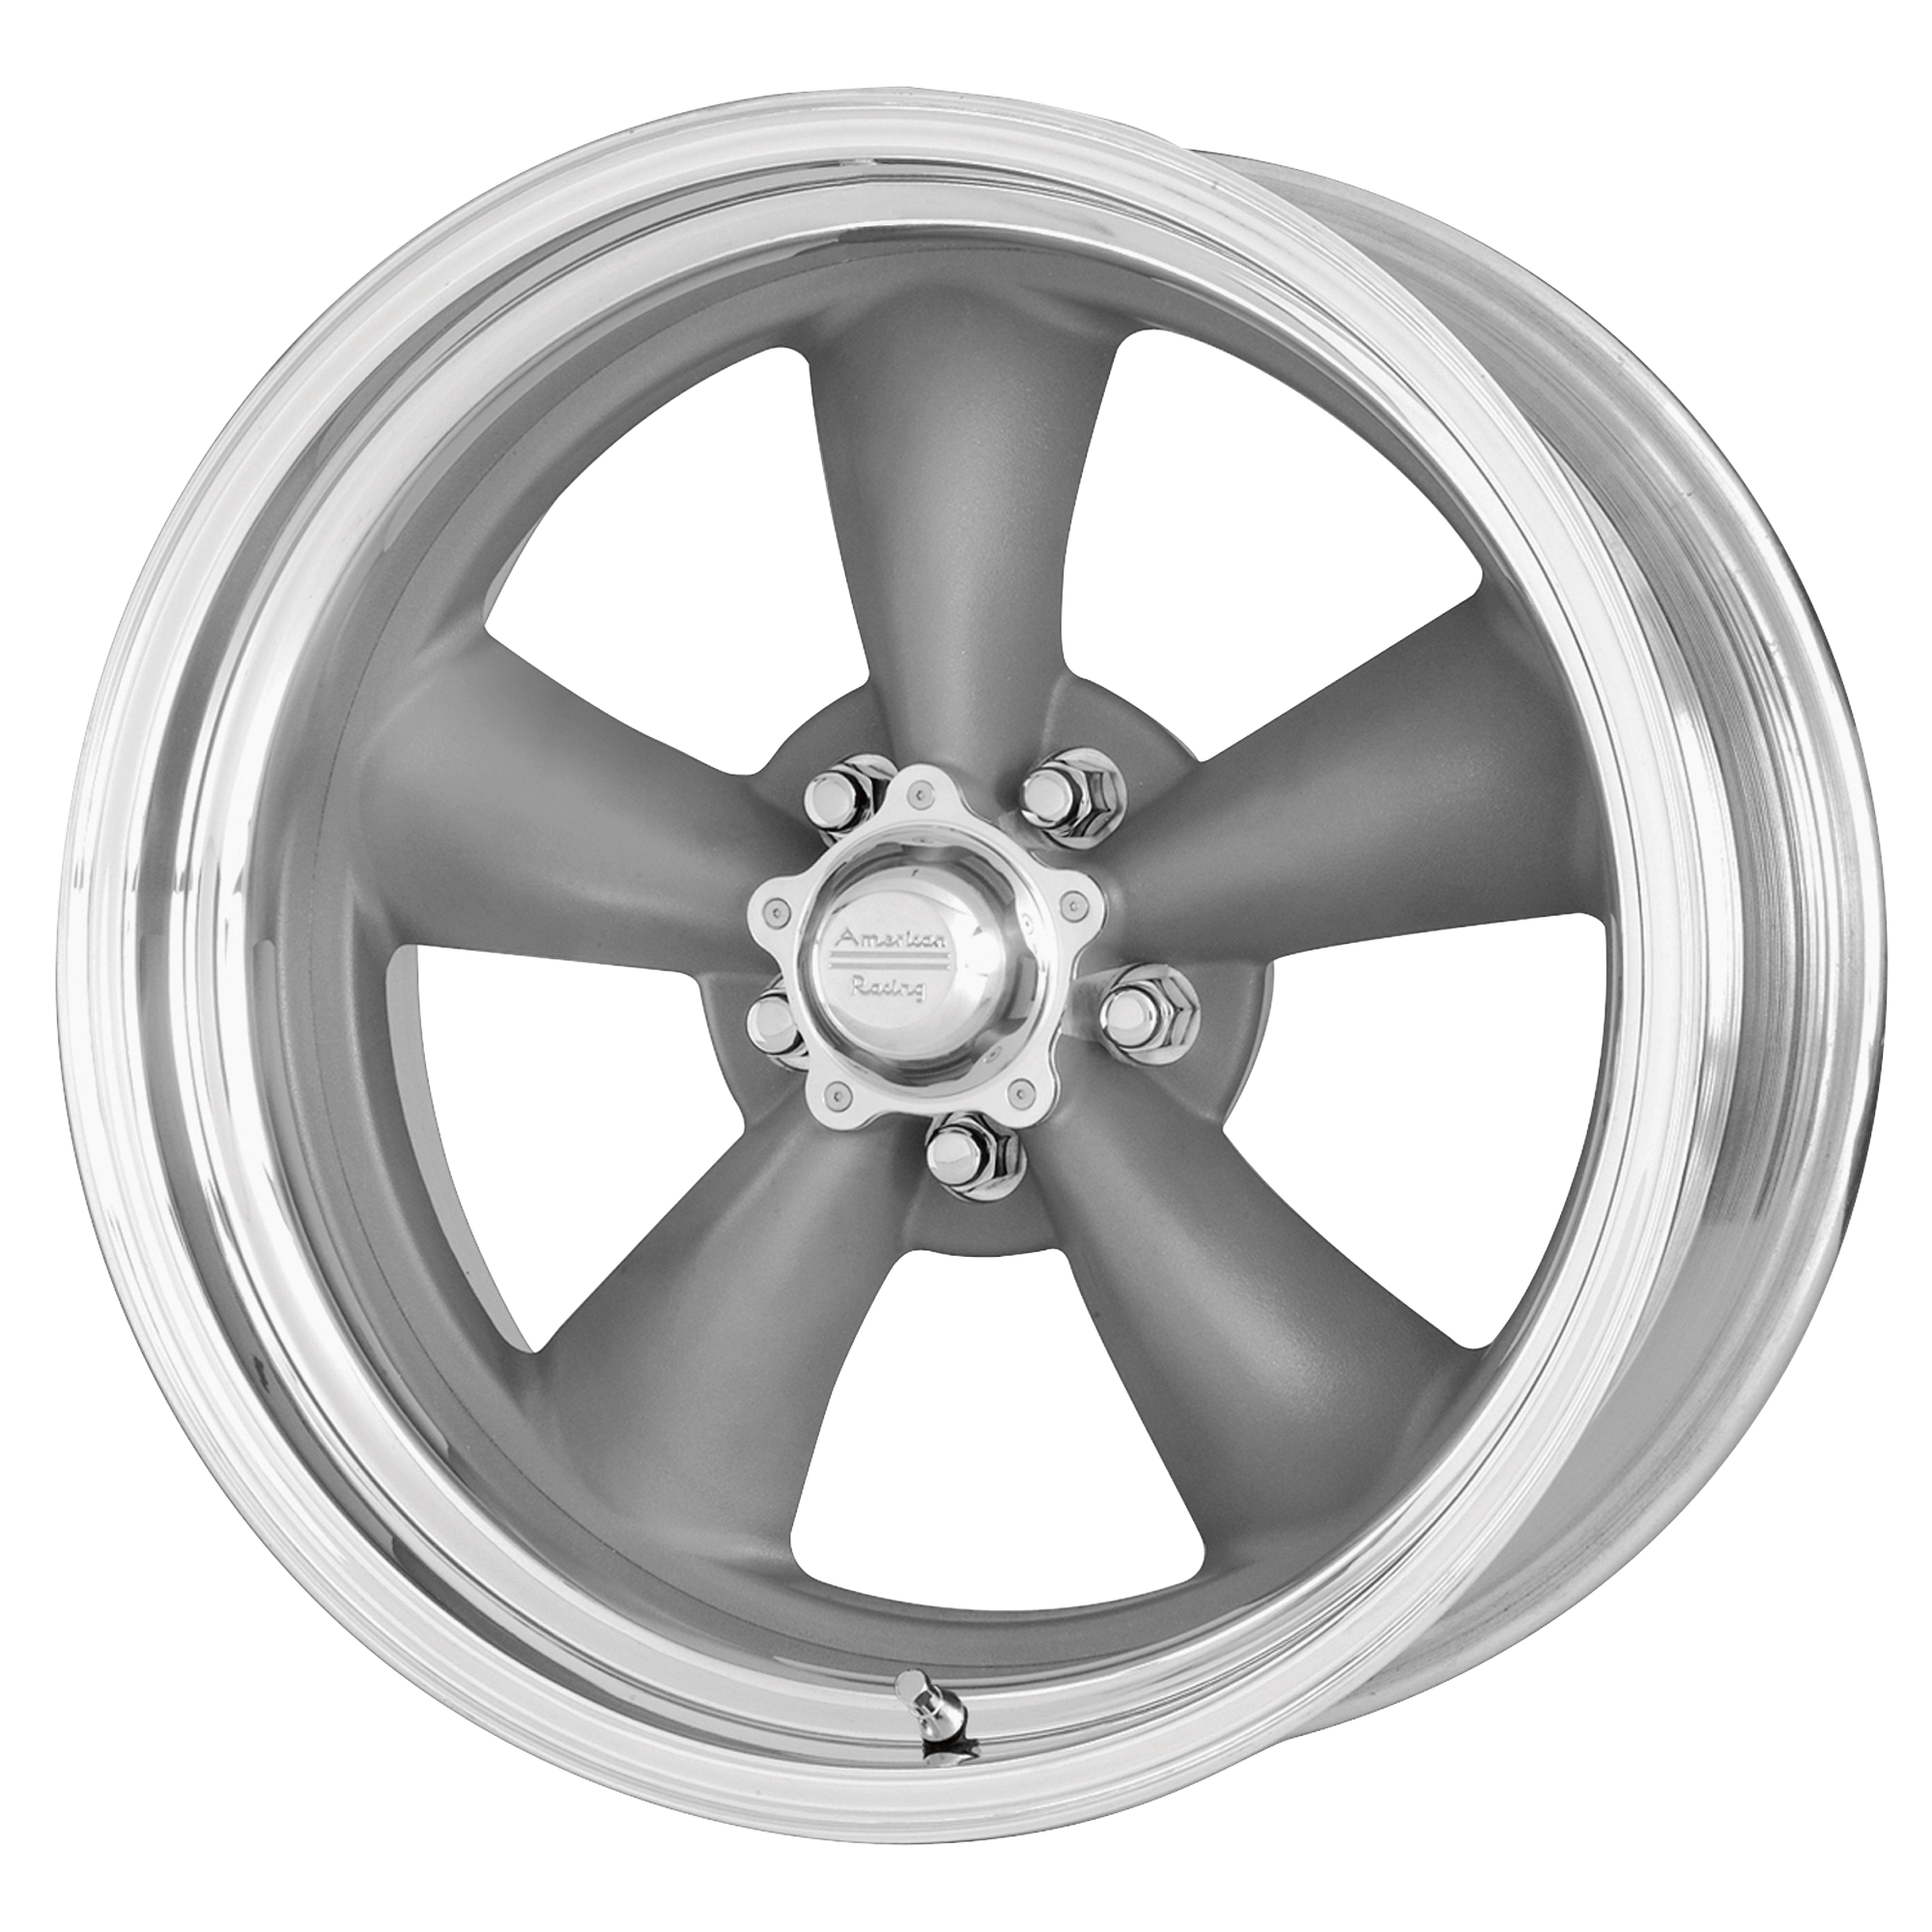 CLASSIC TORQ THRUST II ONE PIECE 17x8 5x114.30 MAG GRAY W/ MACHINED LIP (25 mm) - Tires and Engine Performance